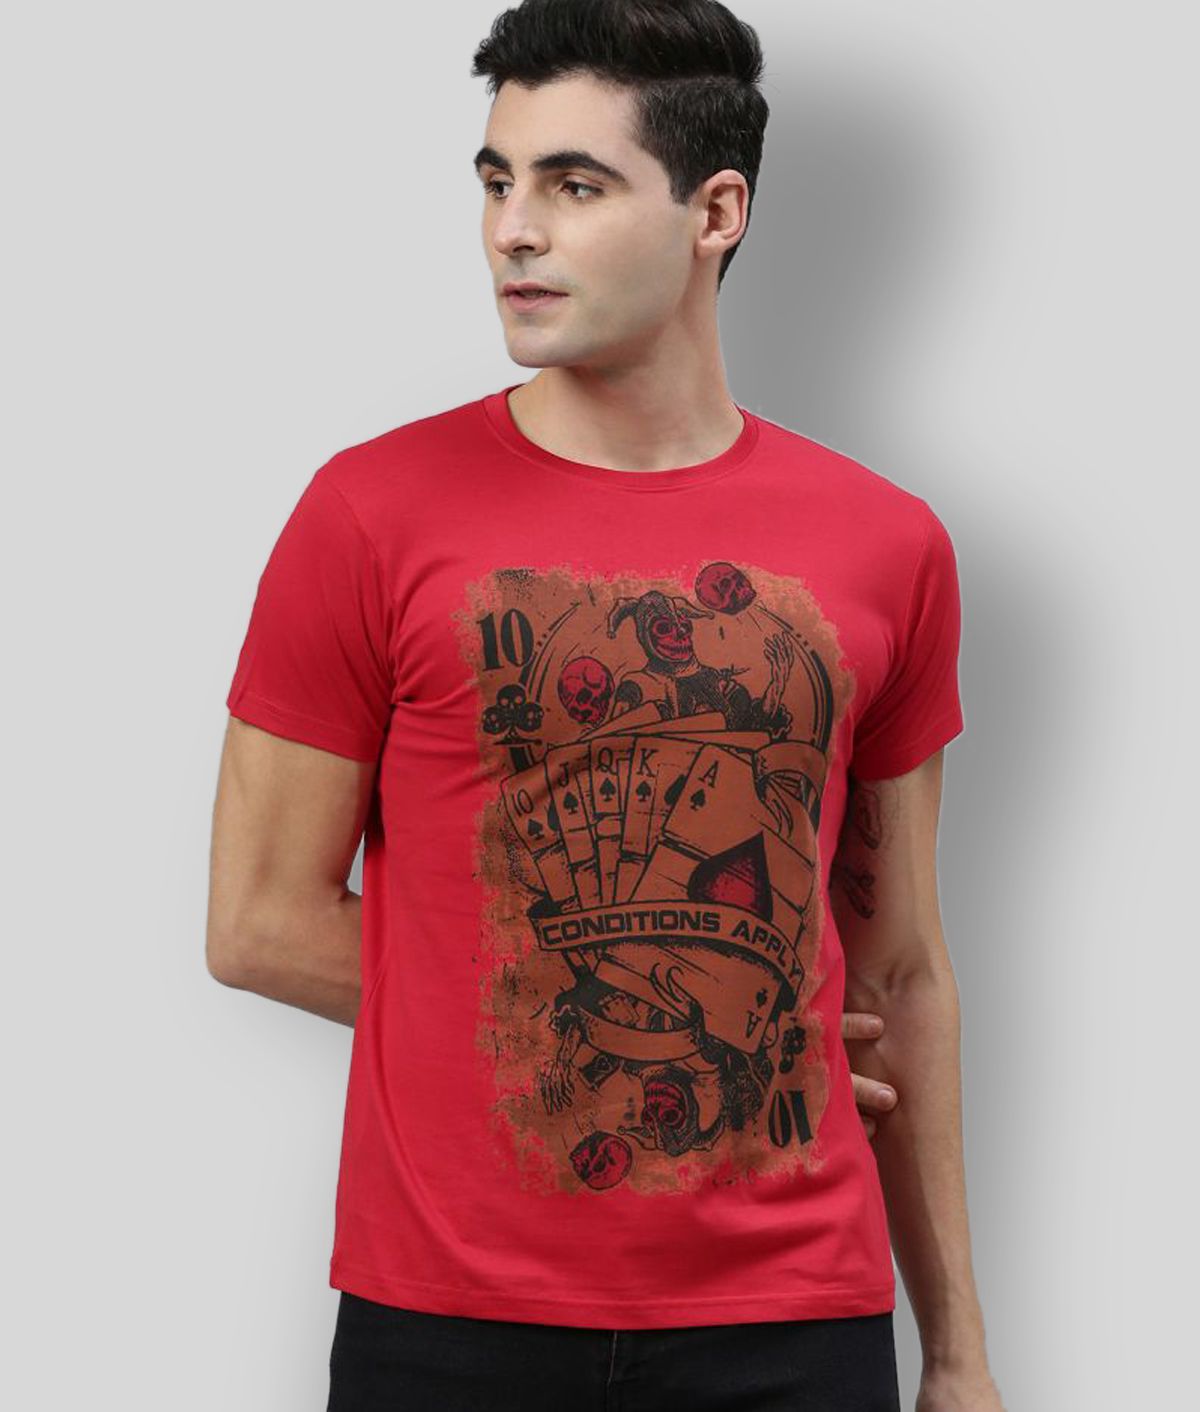     			Conditions Apply - Red Cotton Regular Fit Men's T-Shirt ( Pack of 1 )